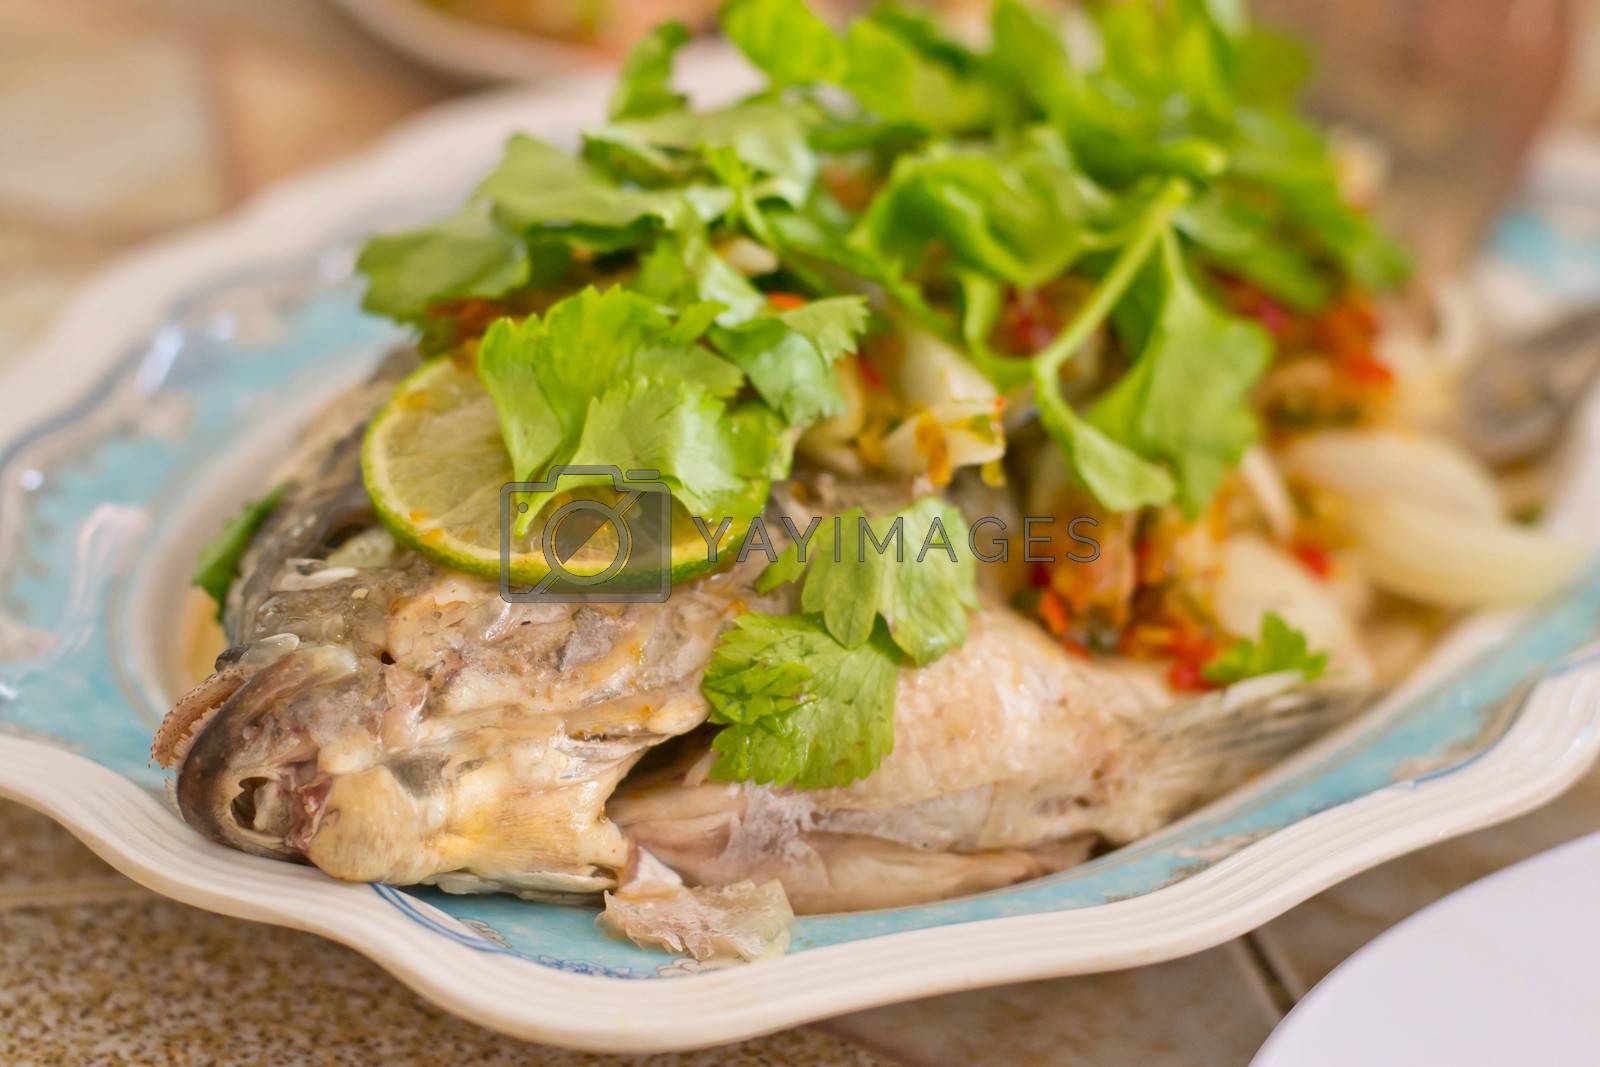 Royalty free image of Steamed Tilapia fish garnish and vegetables by Thanamat